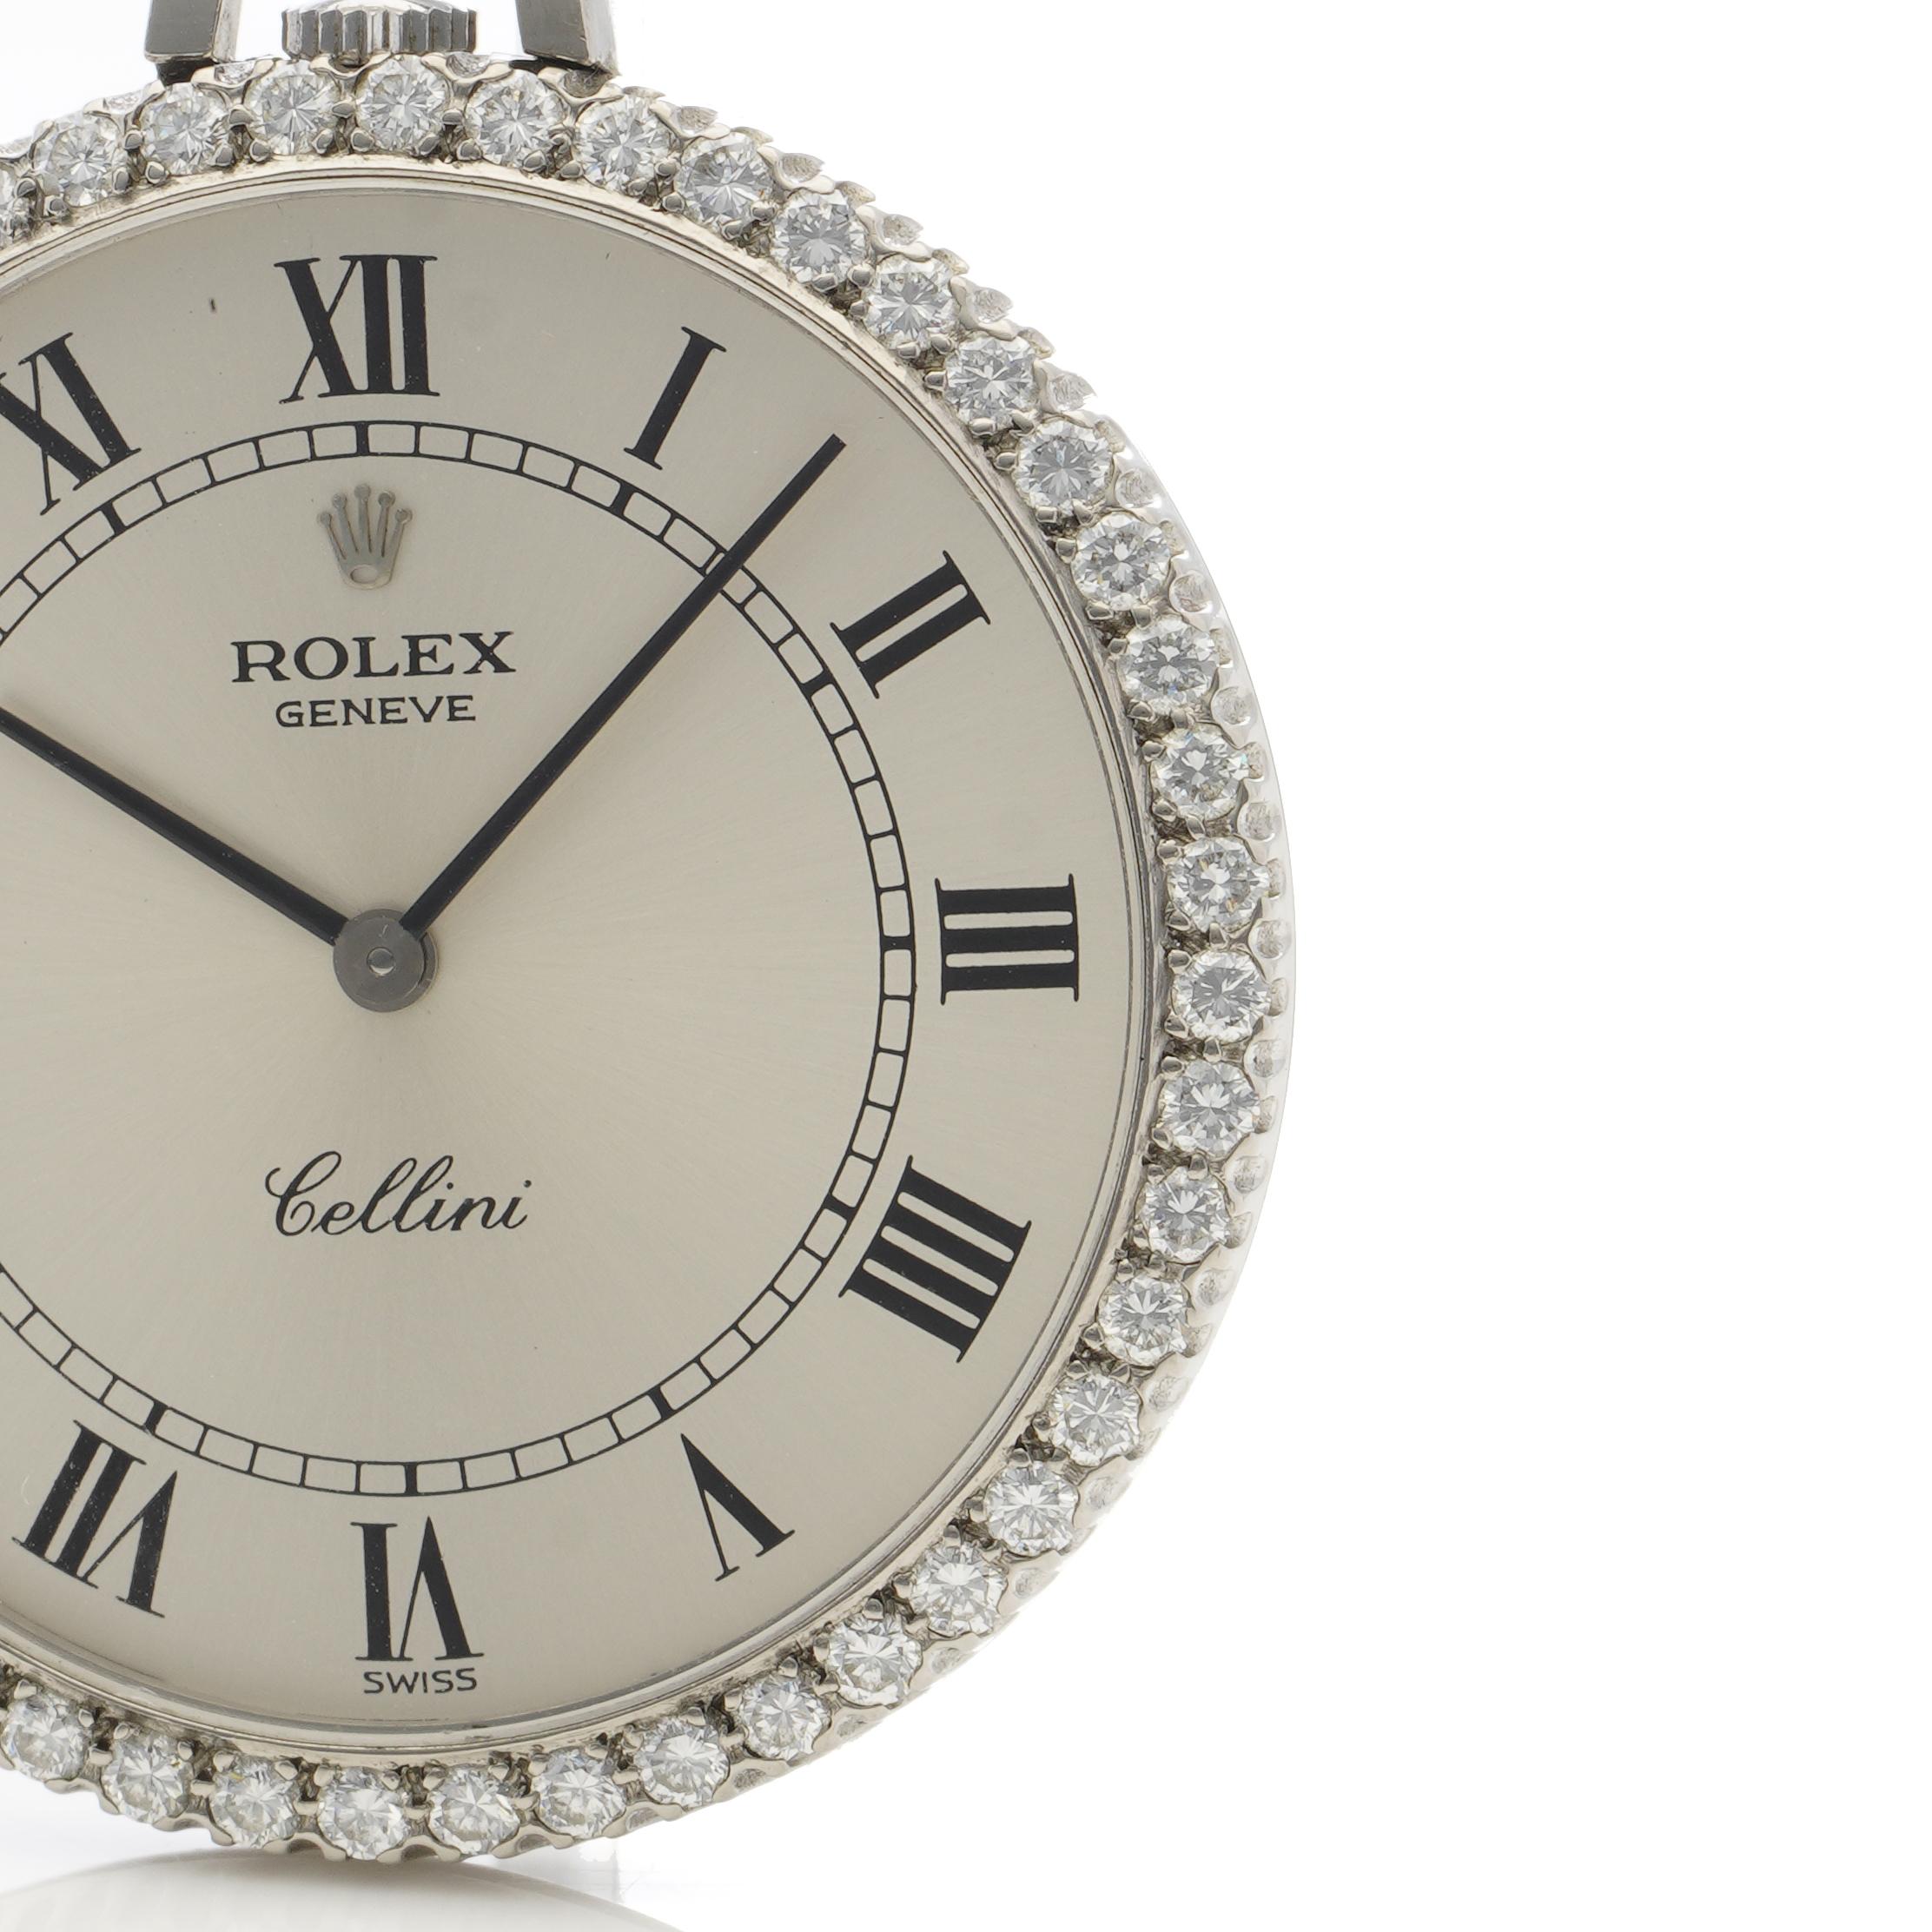 Rolex Cellini 18karat white gold and diamond open-face keyless wind pocket watch. Ref. 3790
Made in Switzerland, Circa 1970's
Dial: Silver with printed Roman chapter and inner five-minute chapter, black hands.
Movement: Manual wind
Calibre: 1600